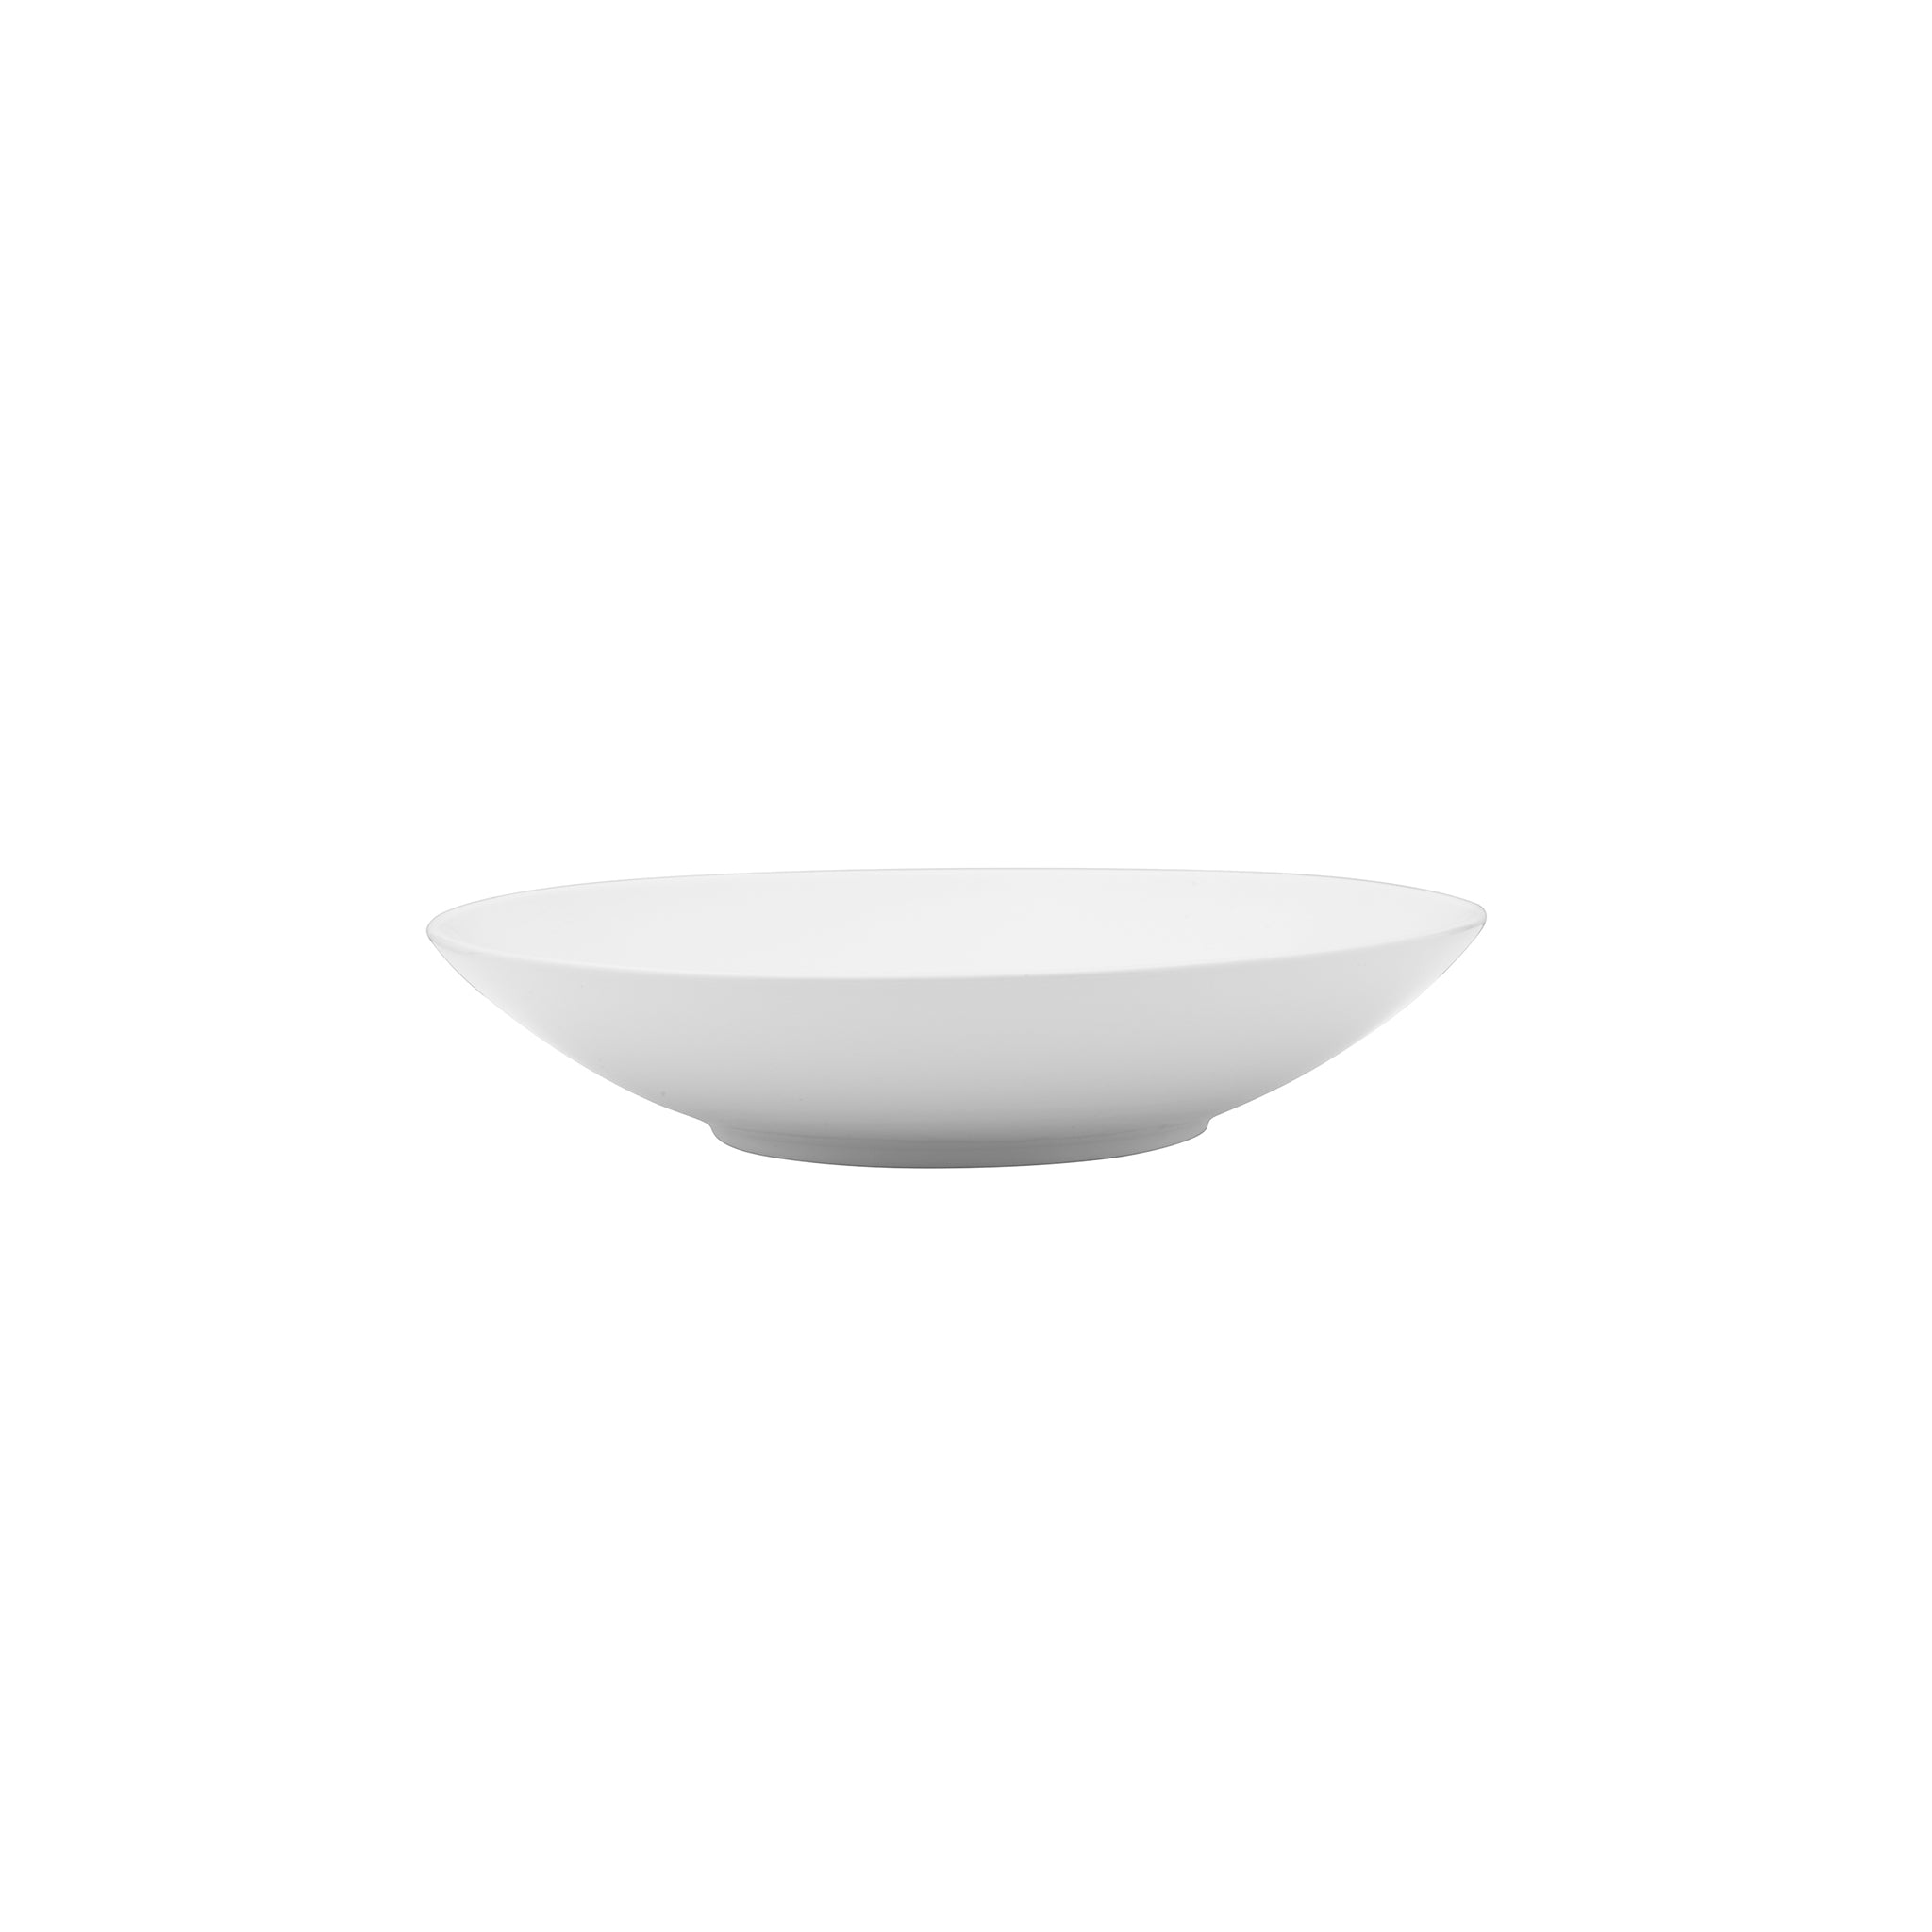 Galleria Porcelain Deep Coupe Plate 11" White